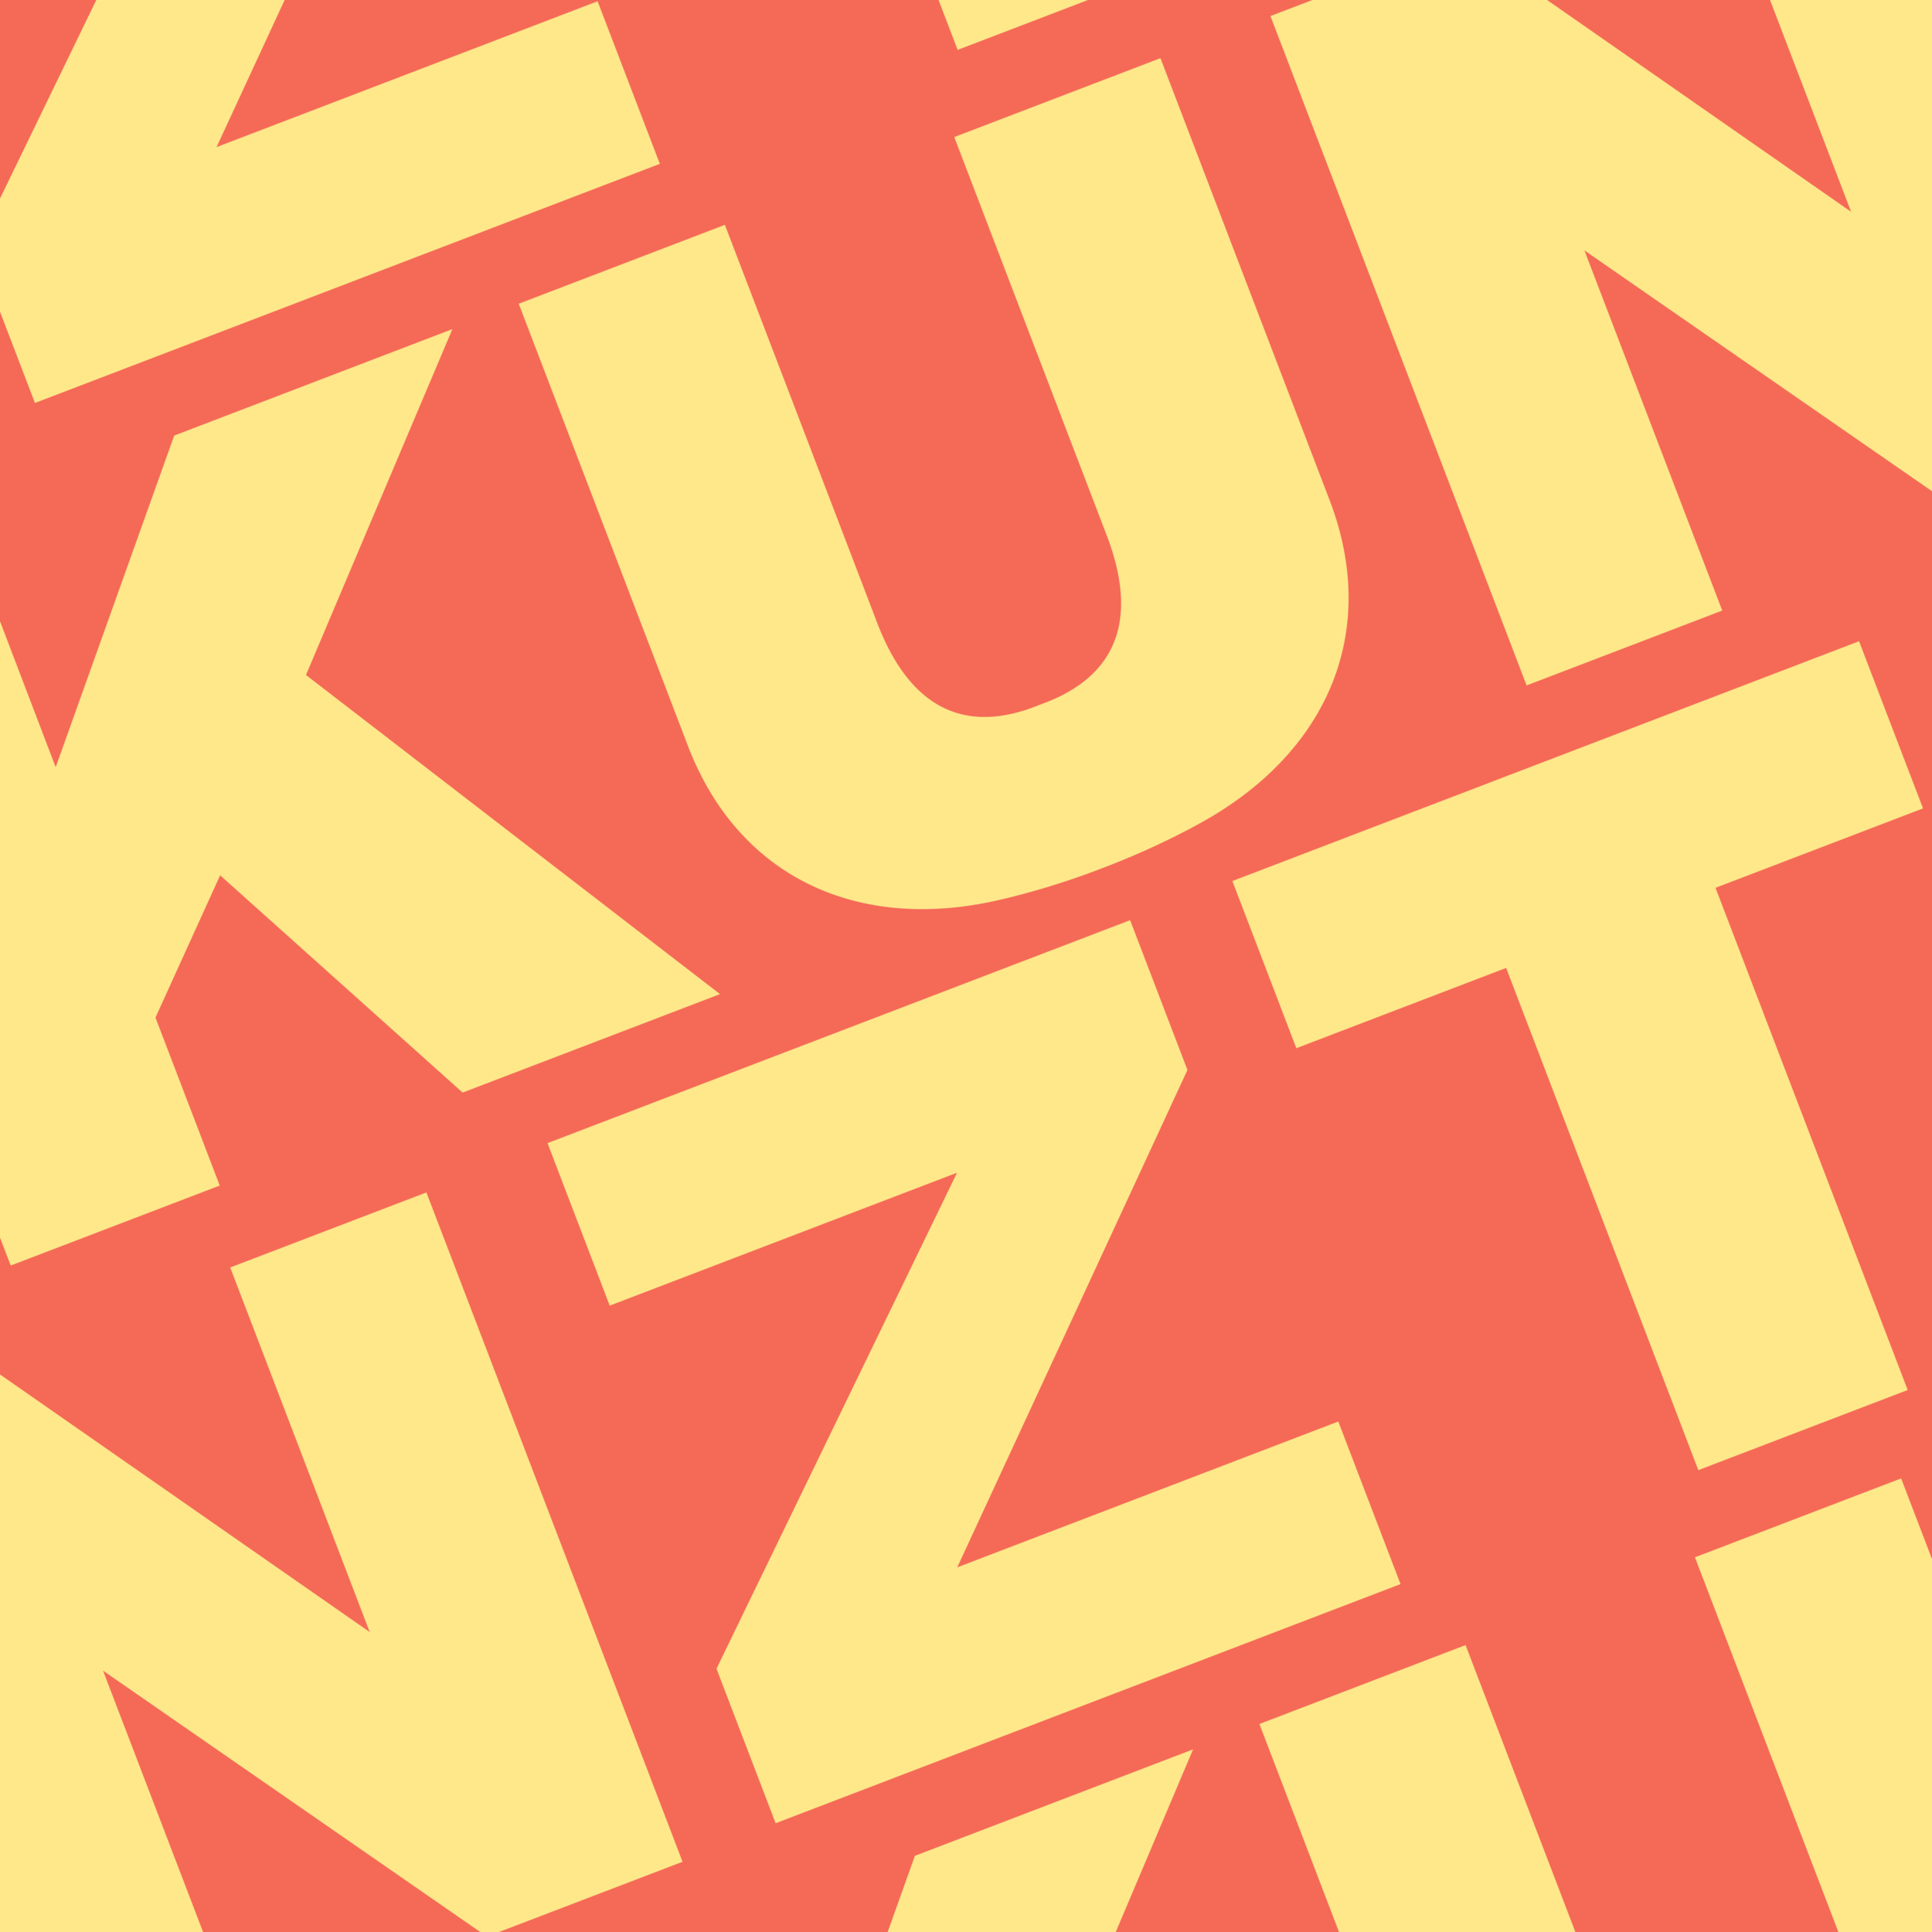 Kunzt_Yellow_Red_Insta Square.png